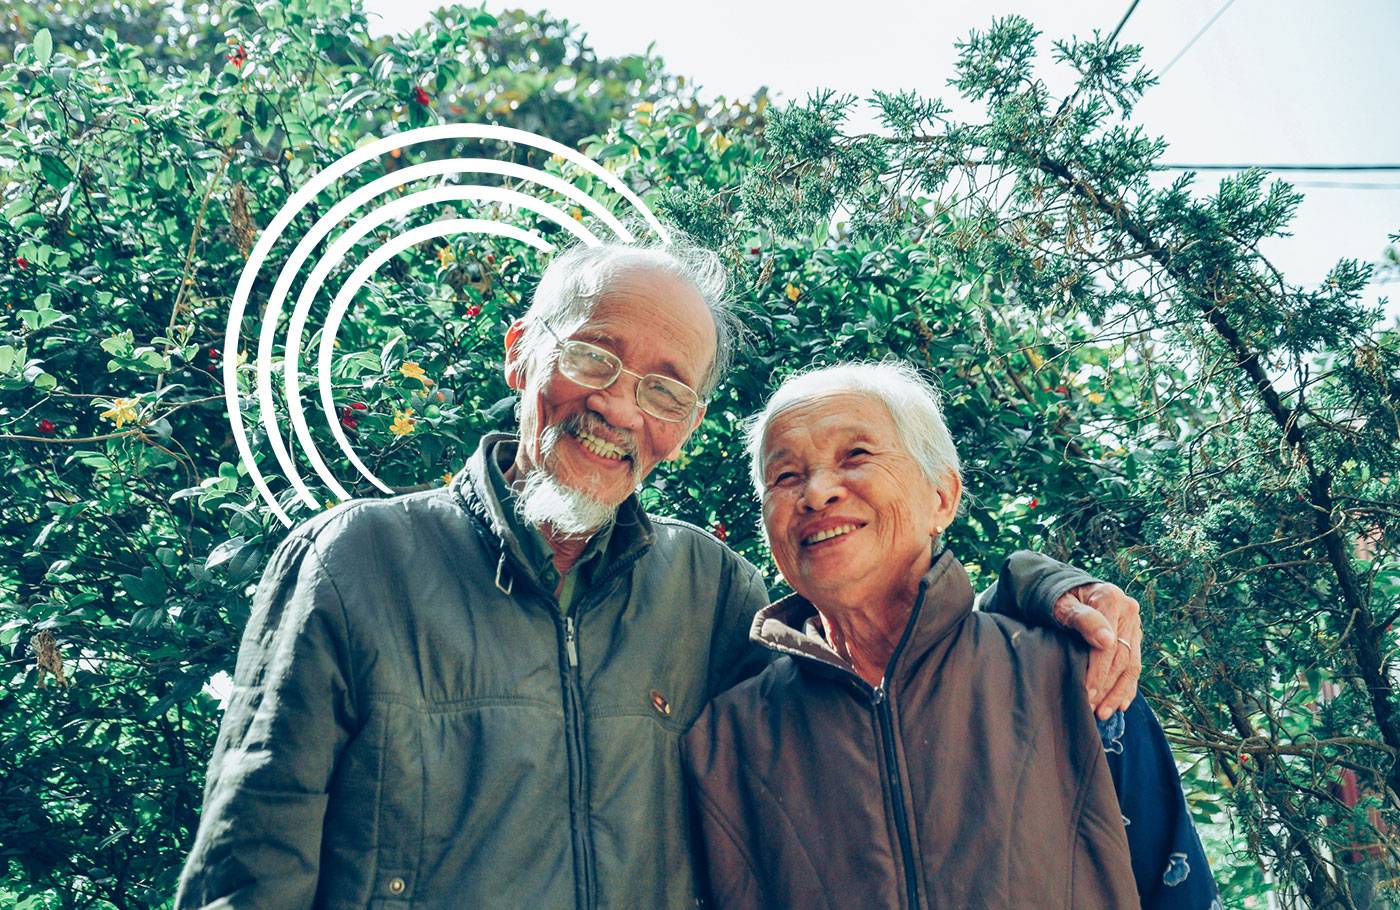 An elderly Asian couple standing outdoors and smiling